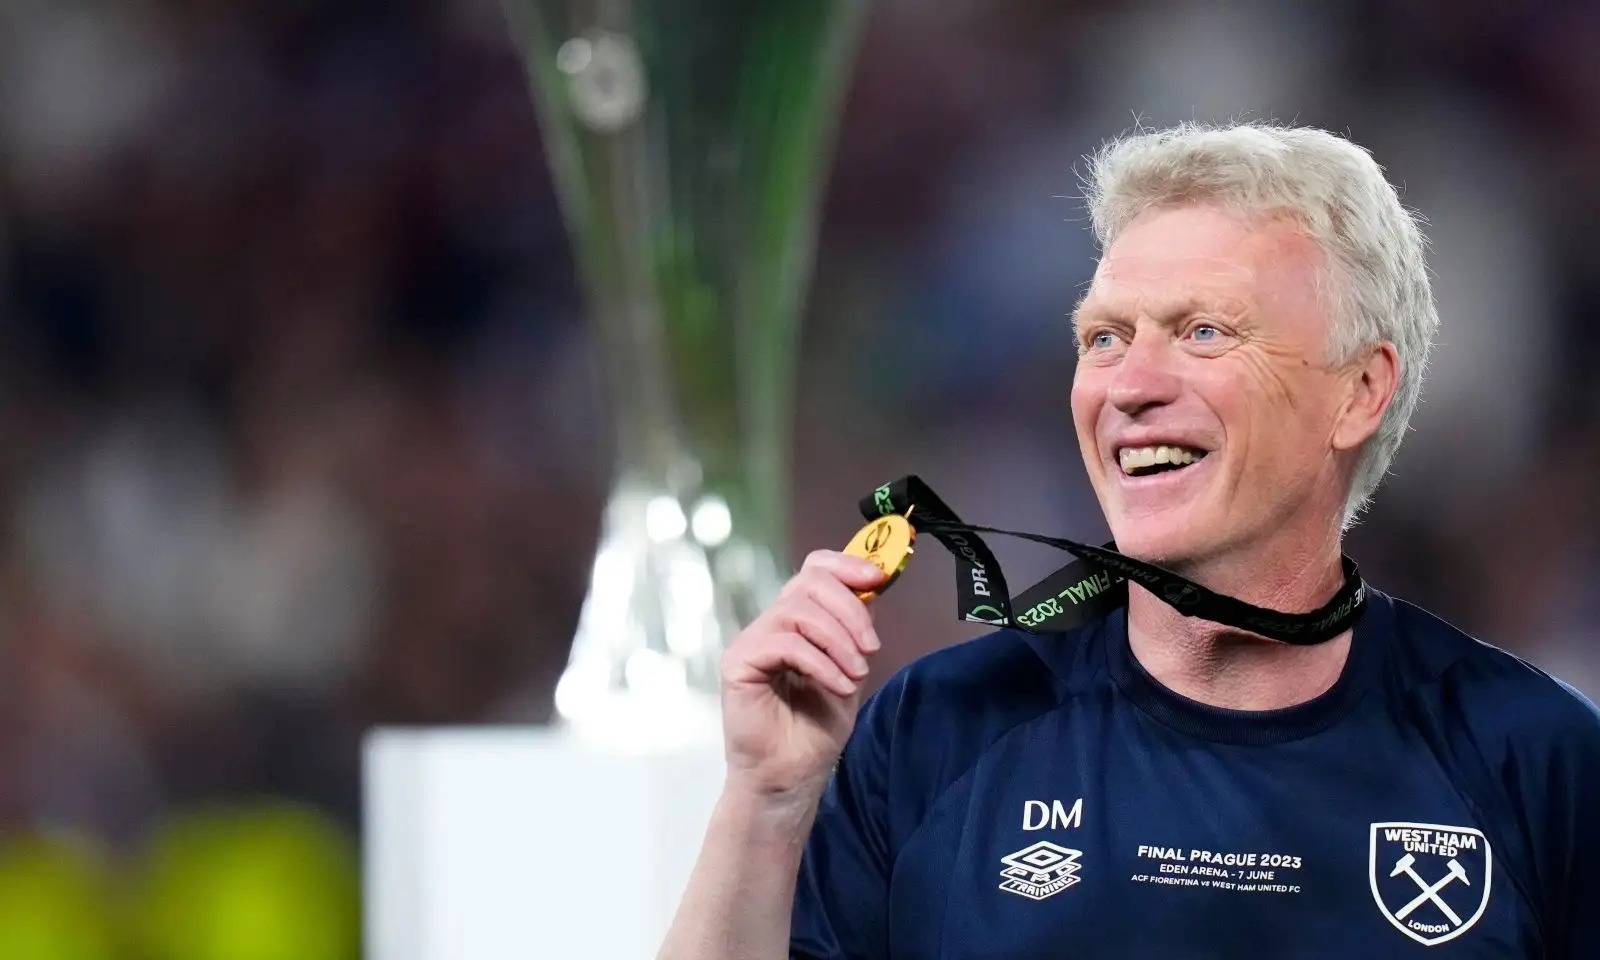 David Moyes’ chaotic Conference League celebrations highlight the culmination of a wonderful career